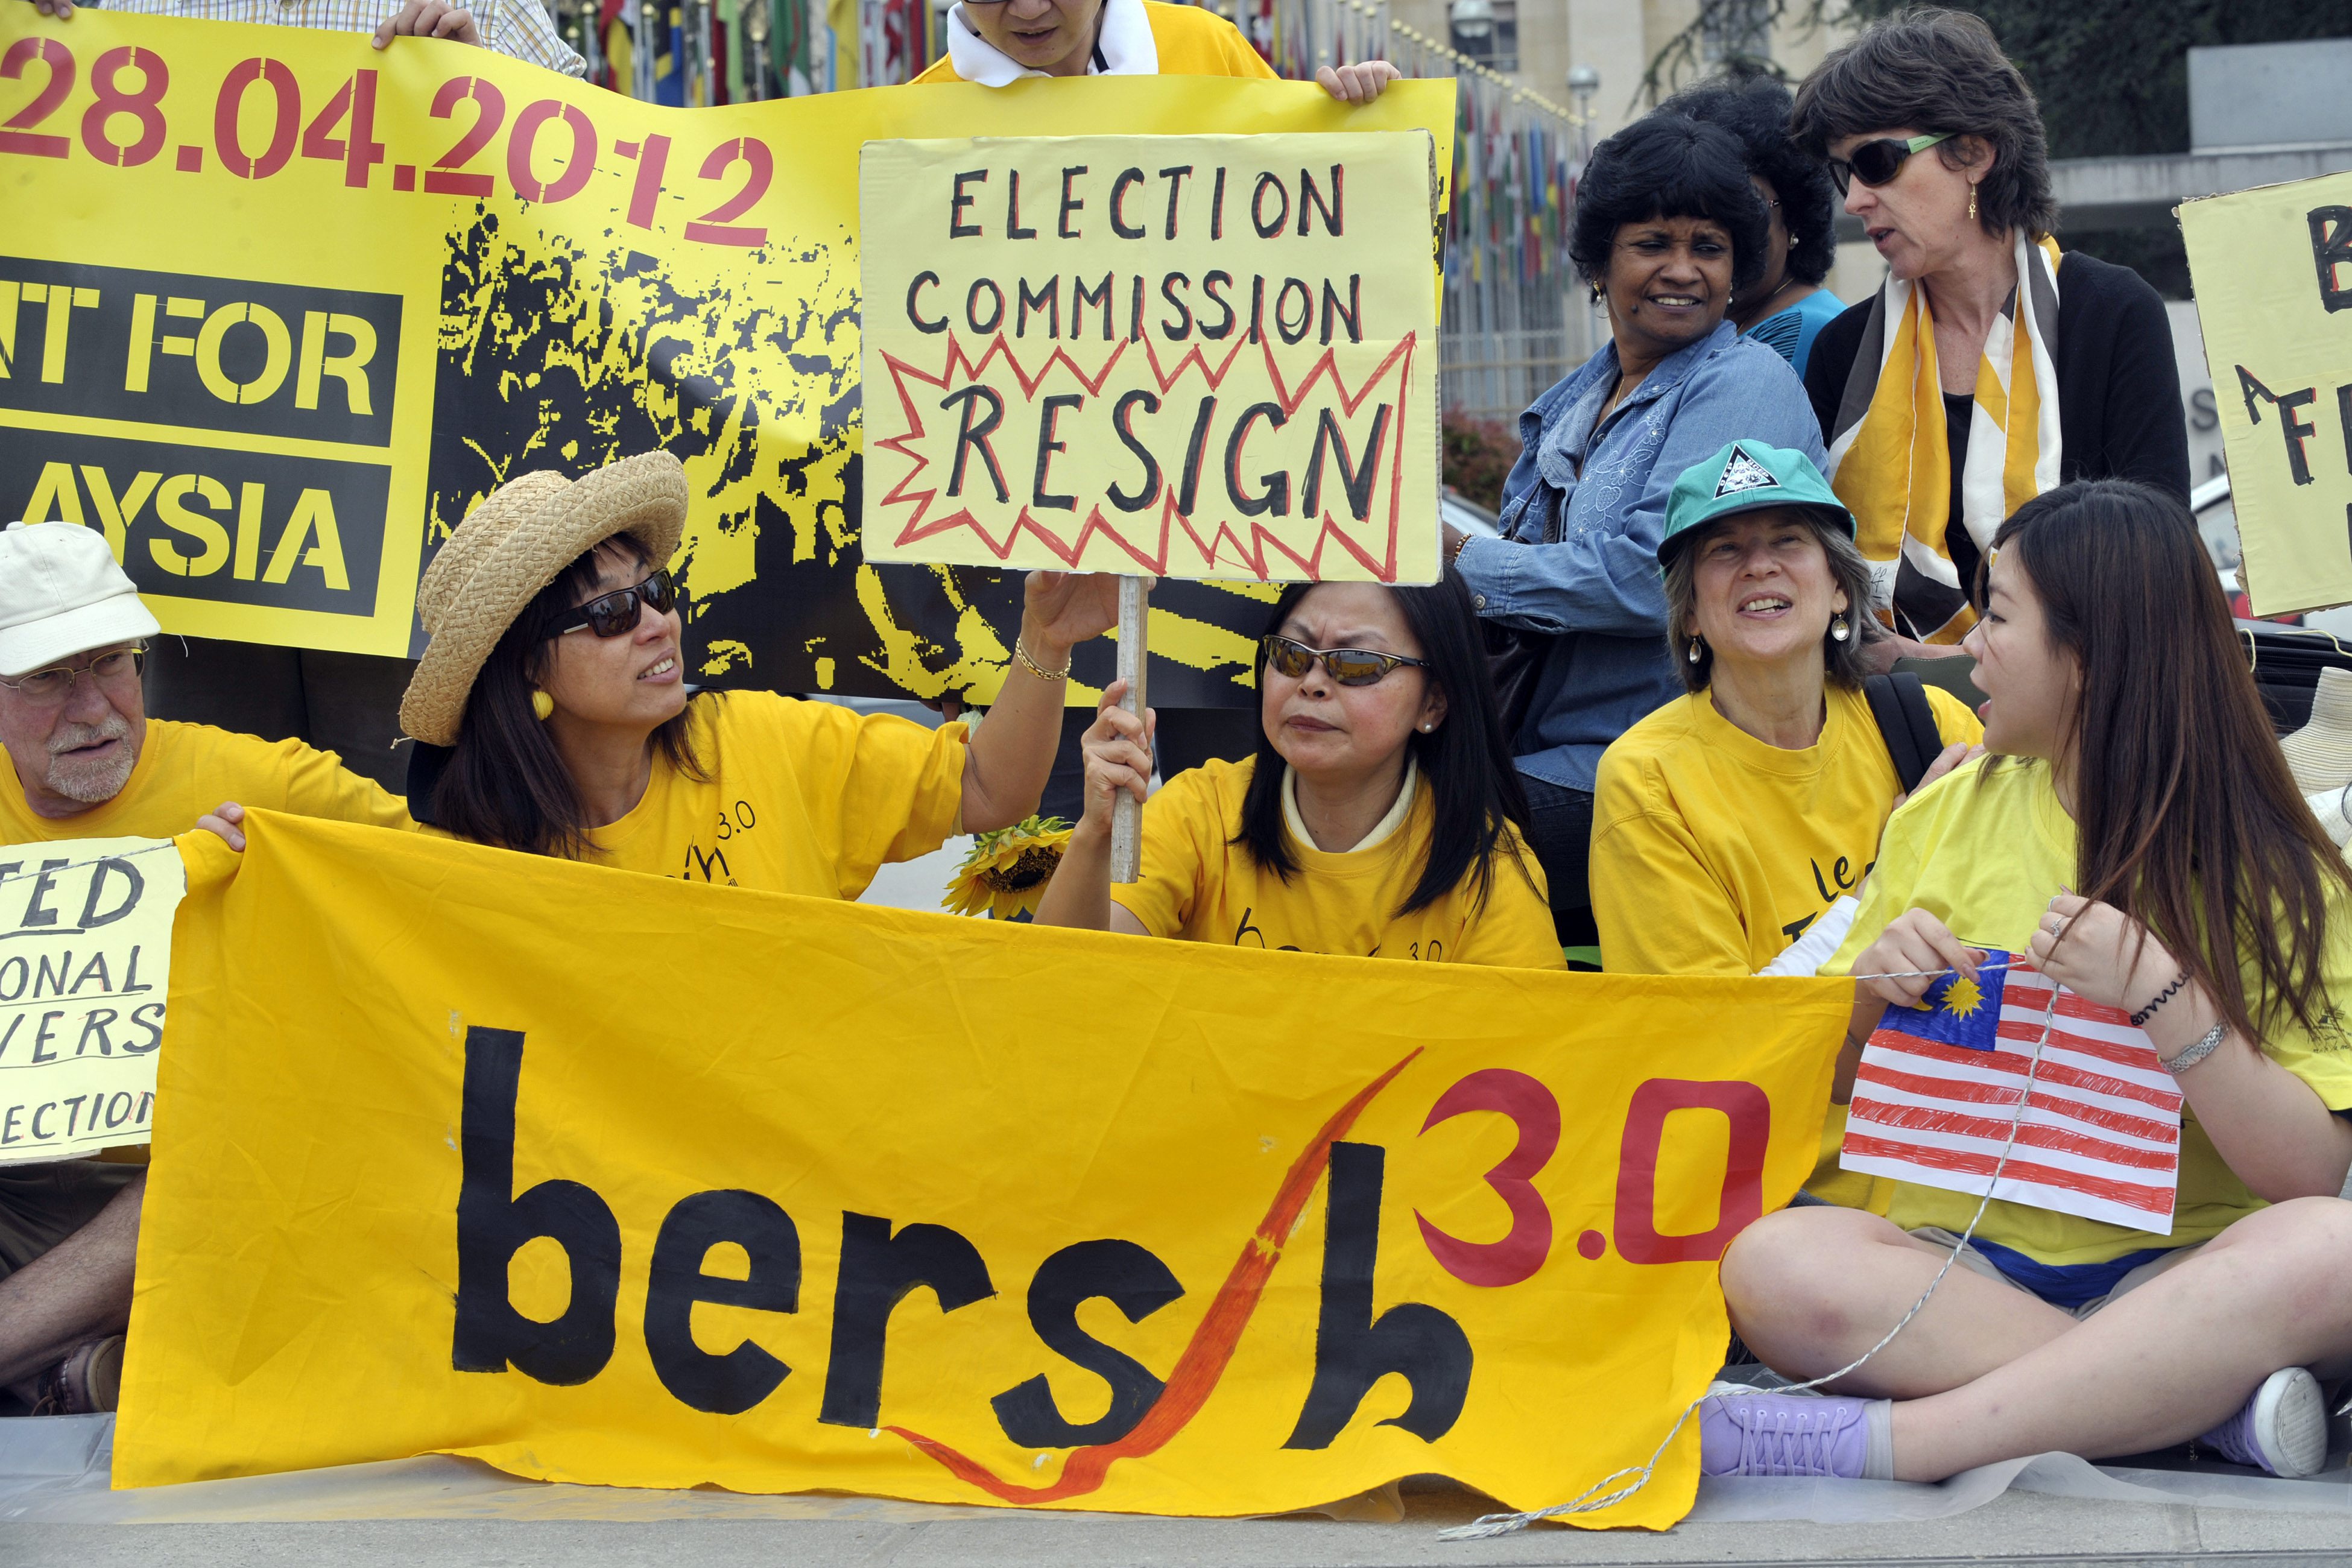 Demonstrators of the Malayan movement Bersih for democracy hold banners to ask for free and fair elections in Malaysia in front of the European headquarters of the United Nations in Geneva on April 28, 2012. (Martial Trezzini—Keystone/AP)